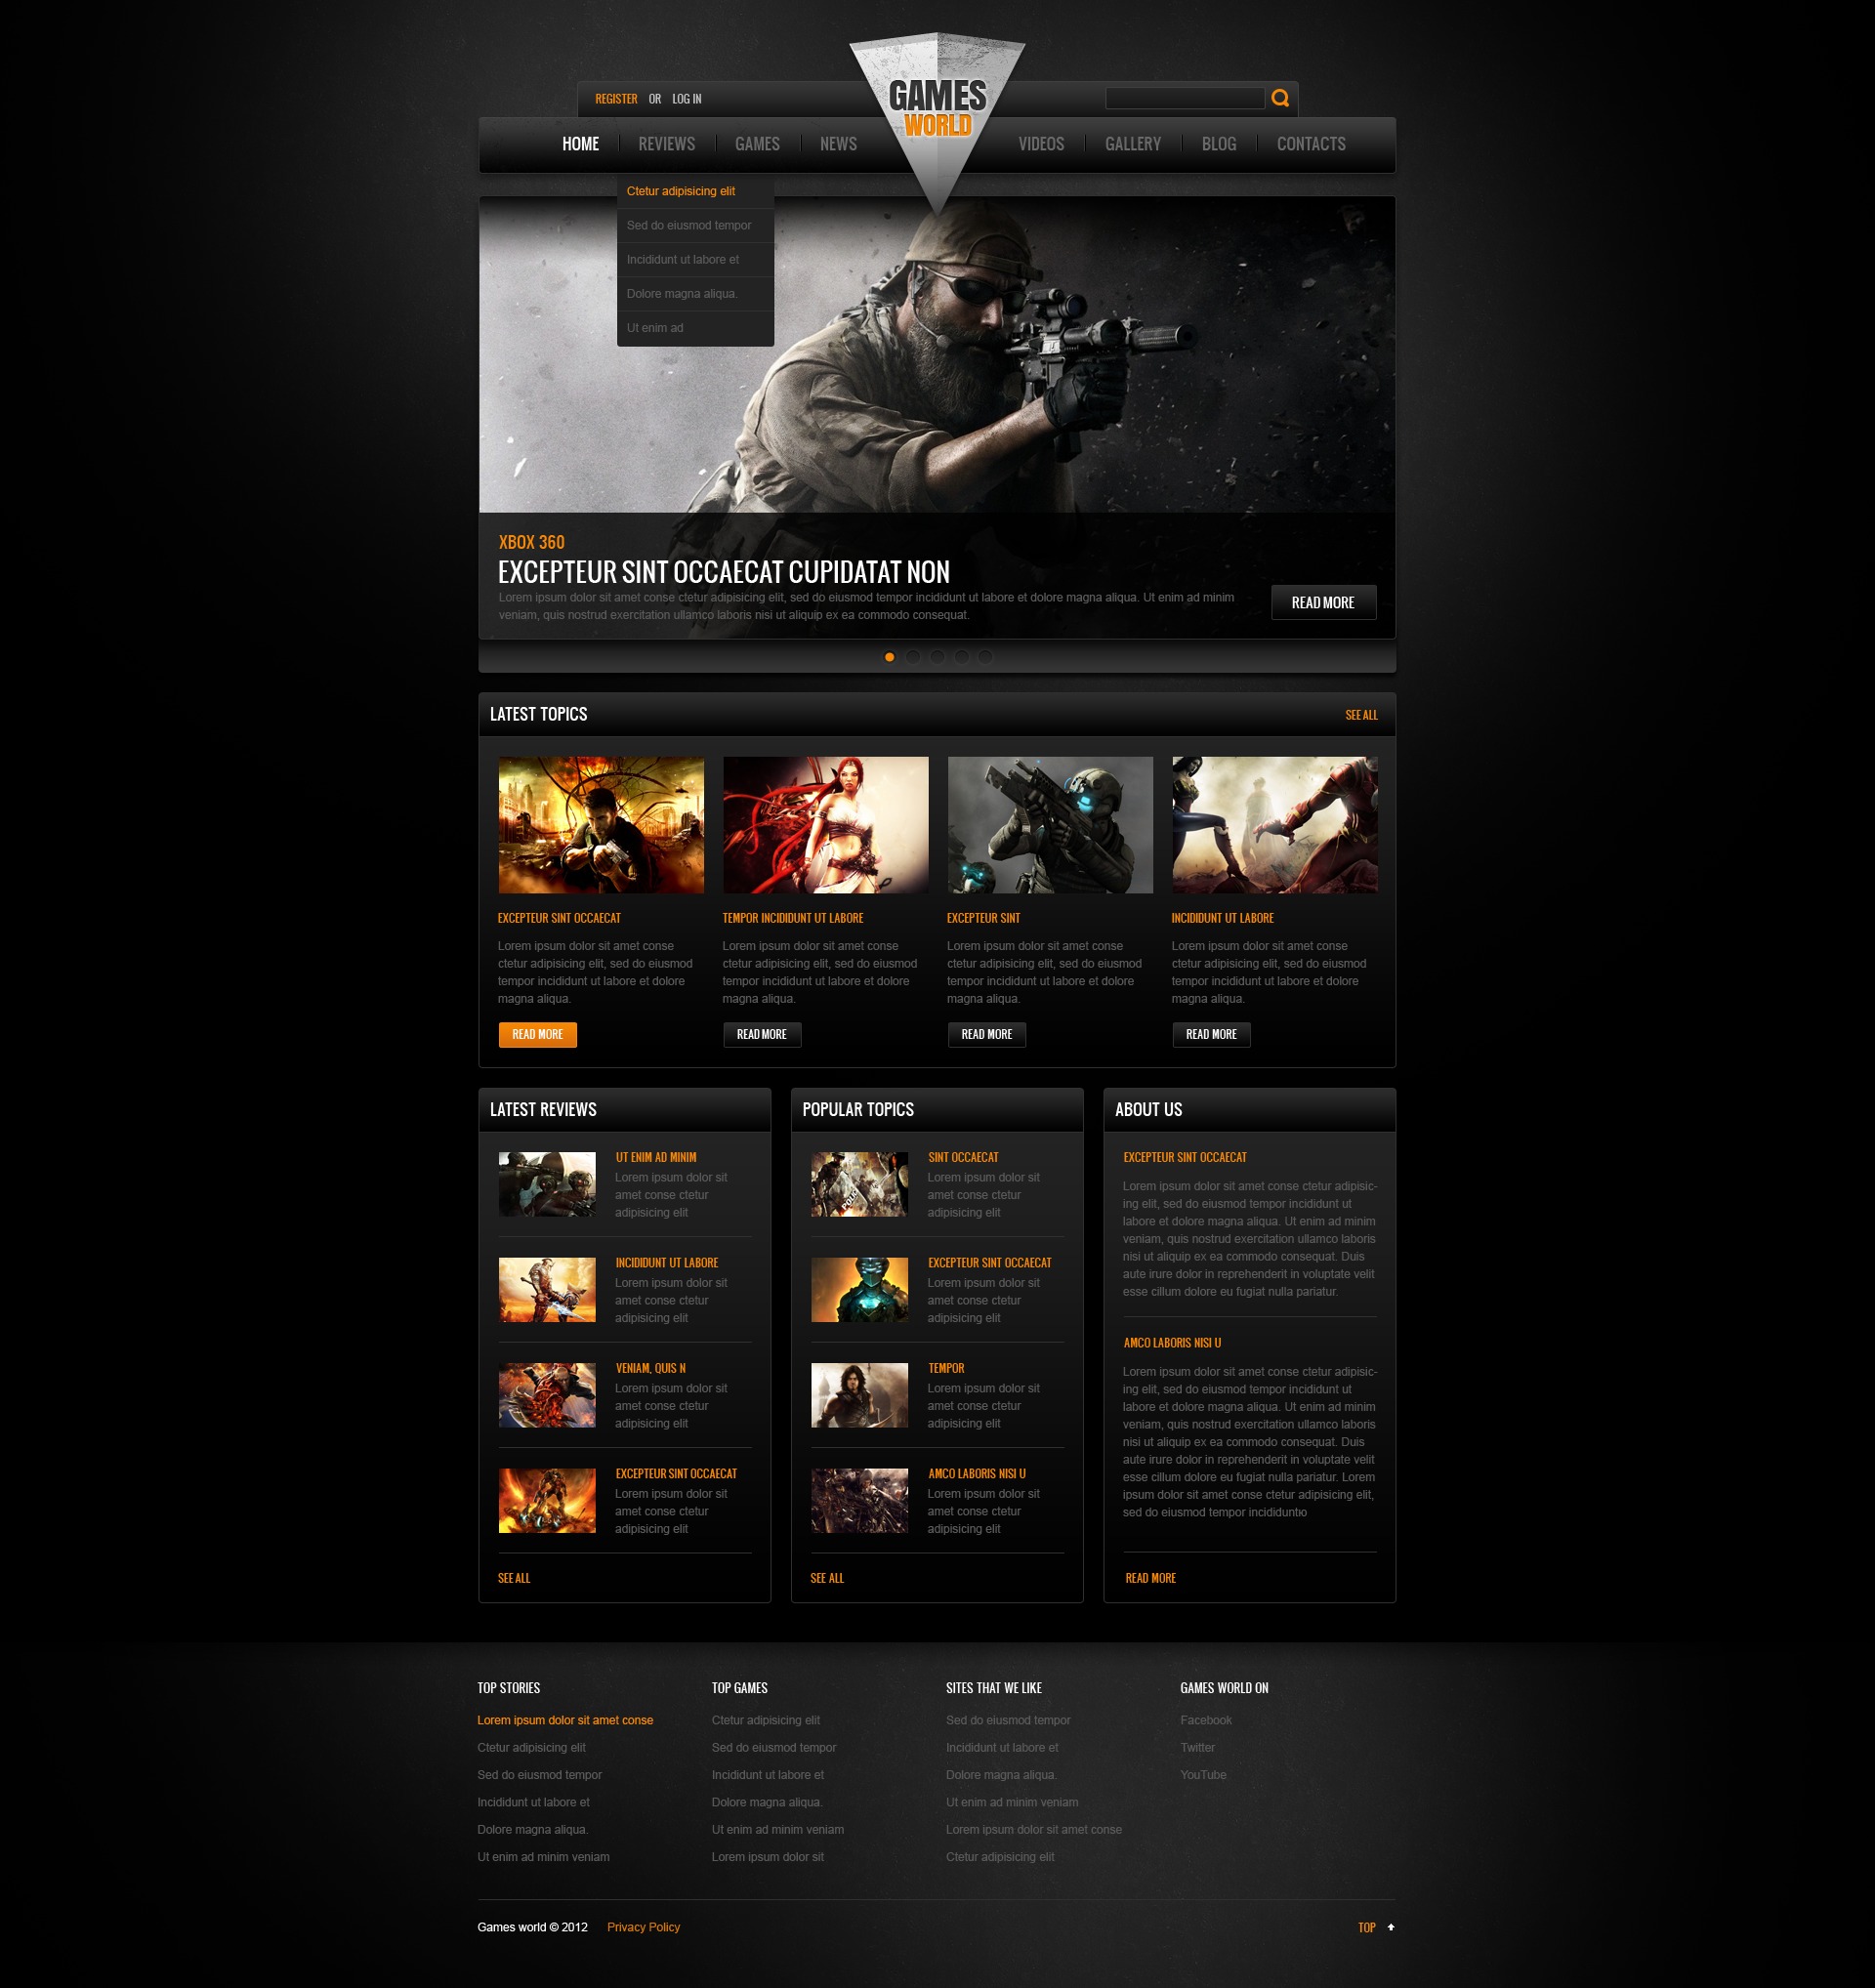 End Game Web designs, themes, templates and downloadable graphic